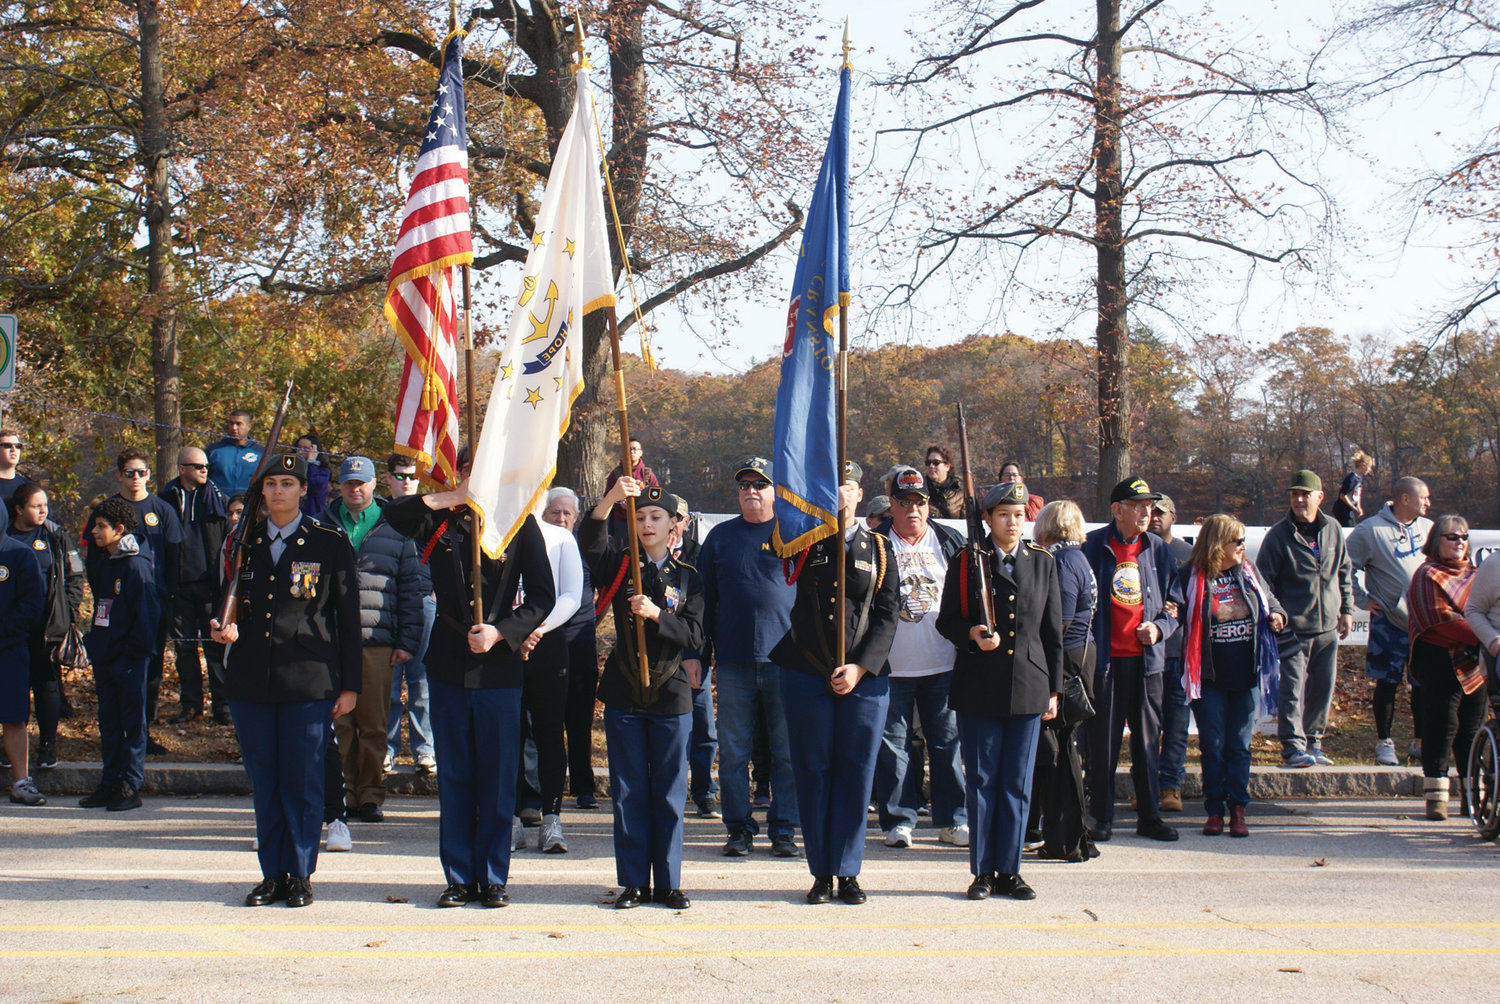 STEPPING OFF: The Cranston High School East JROTC led the way with veterans, dignitaries and special guests prior to the running of the seventh annual Park View Veterans Day 5K on Monday.